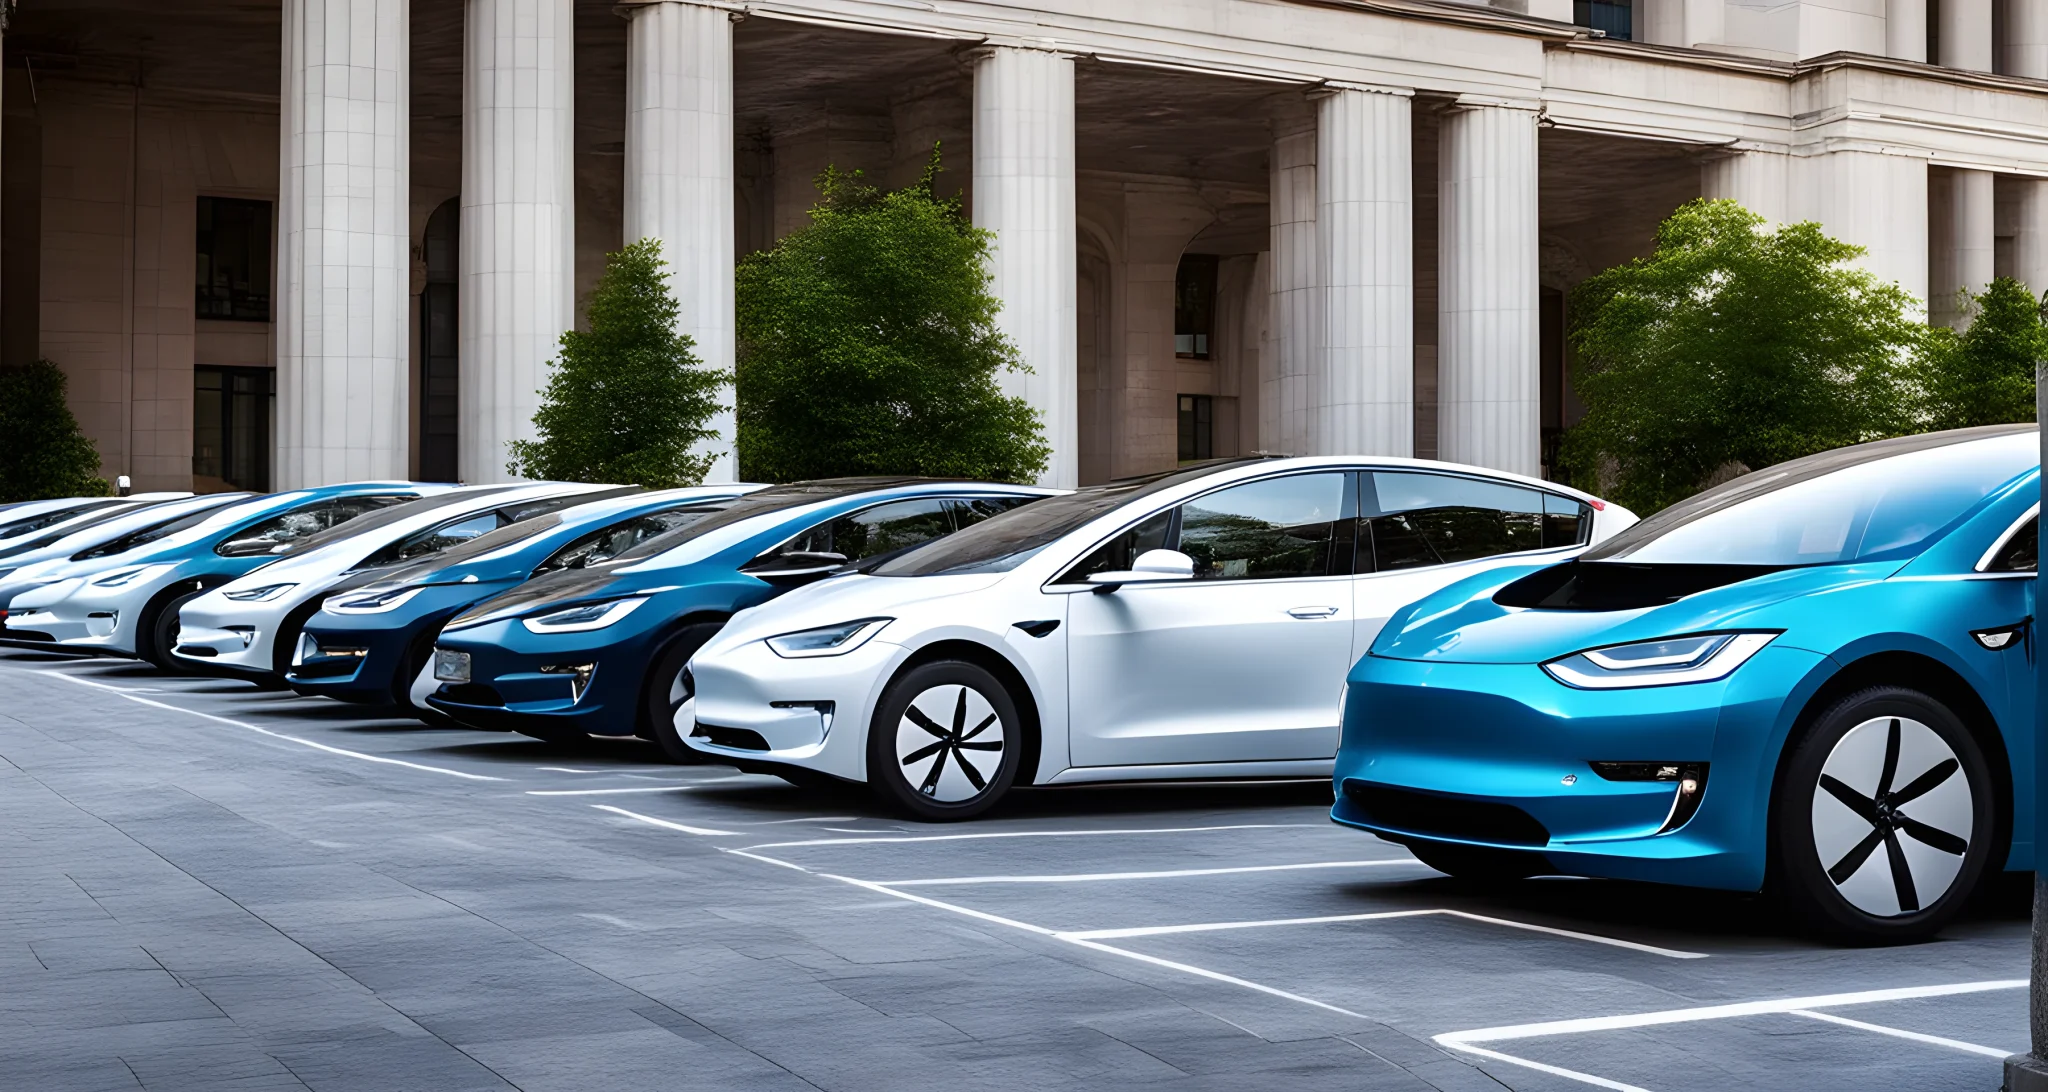 The image shows a variety of electric vehicles lined up outside a government building, with officials and industry representatives discussing regulations and incentives for electric vehicles.